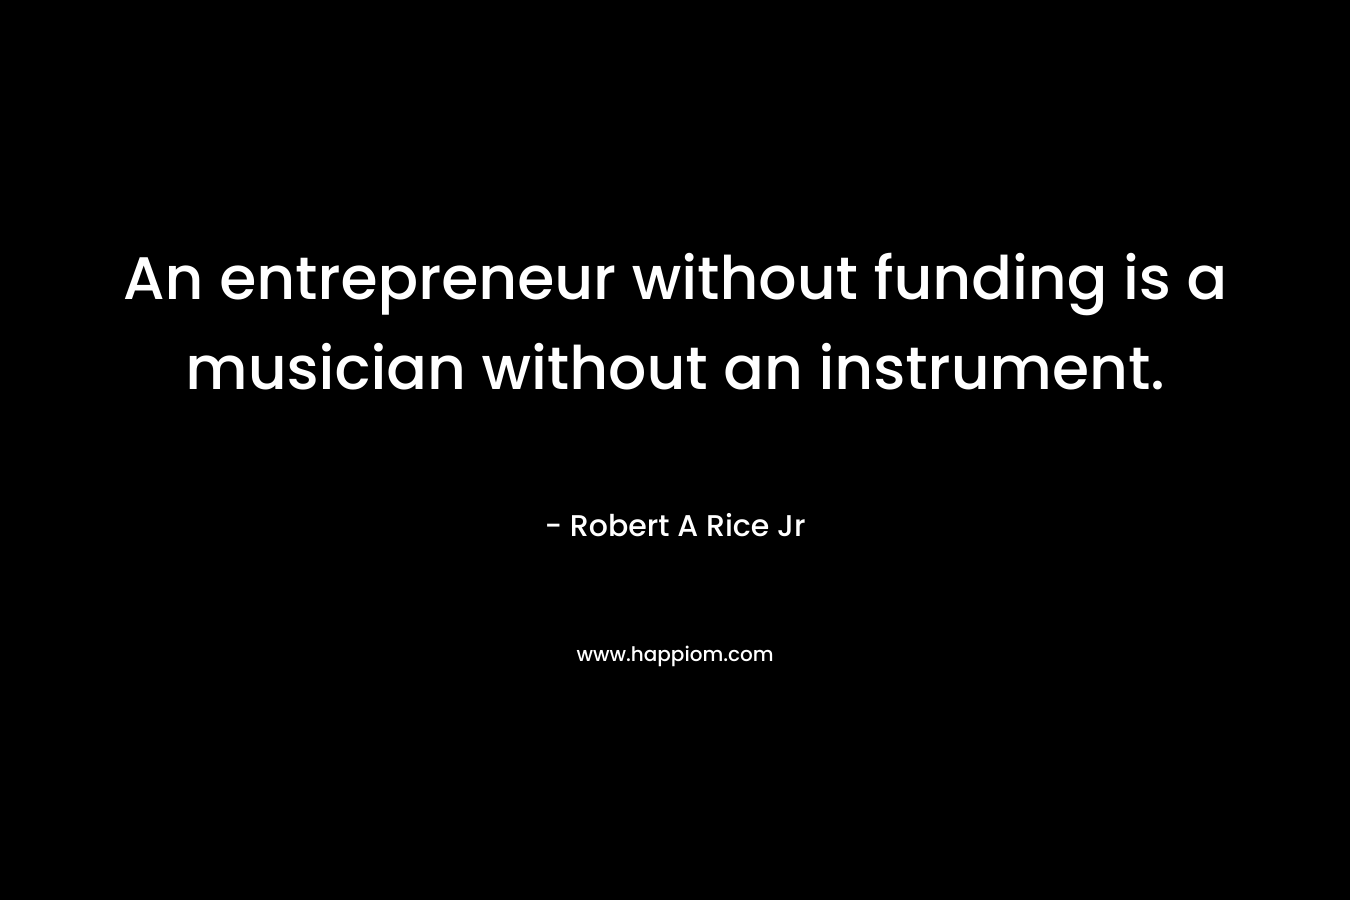 An entrepreneur without funding is a musician without an instrument. – Robert A Rice Jr